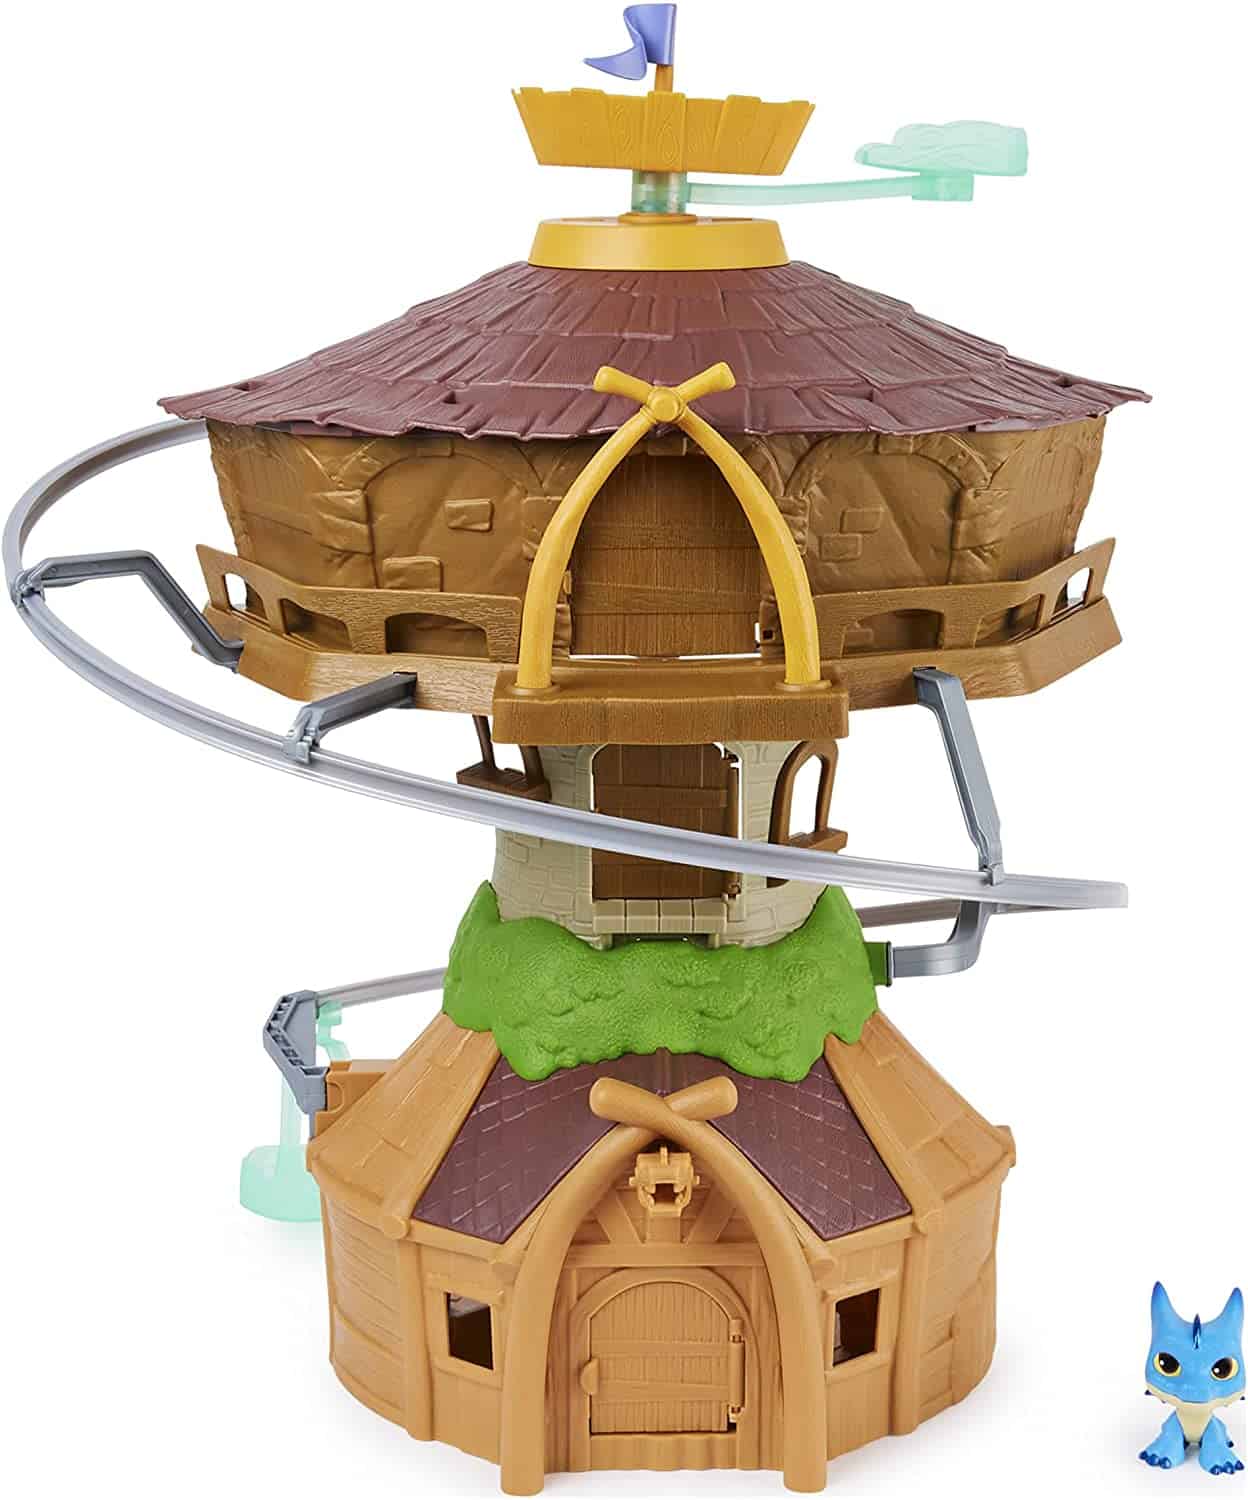 Amazon: Dragons Rescue Riders Roost Adventure Playset w/ Mini Winger Dragon Figure ONLY $14.99